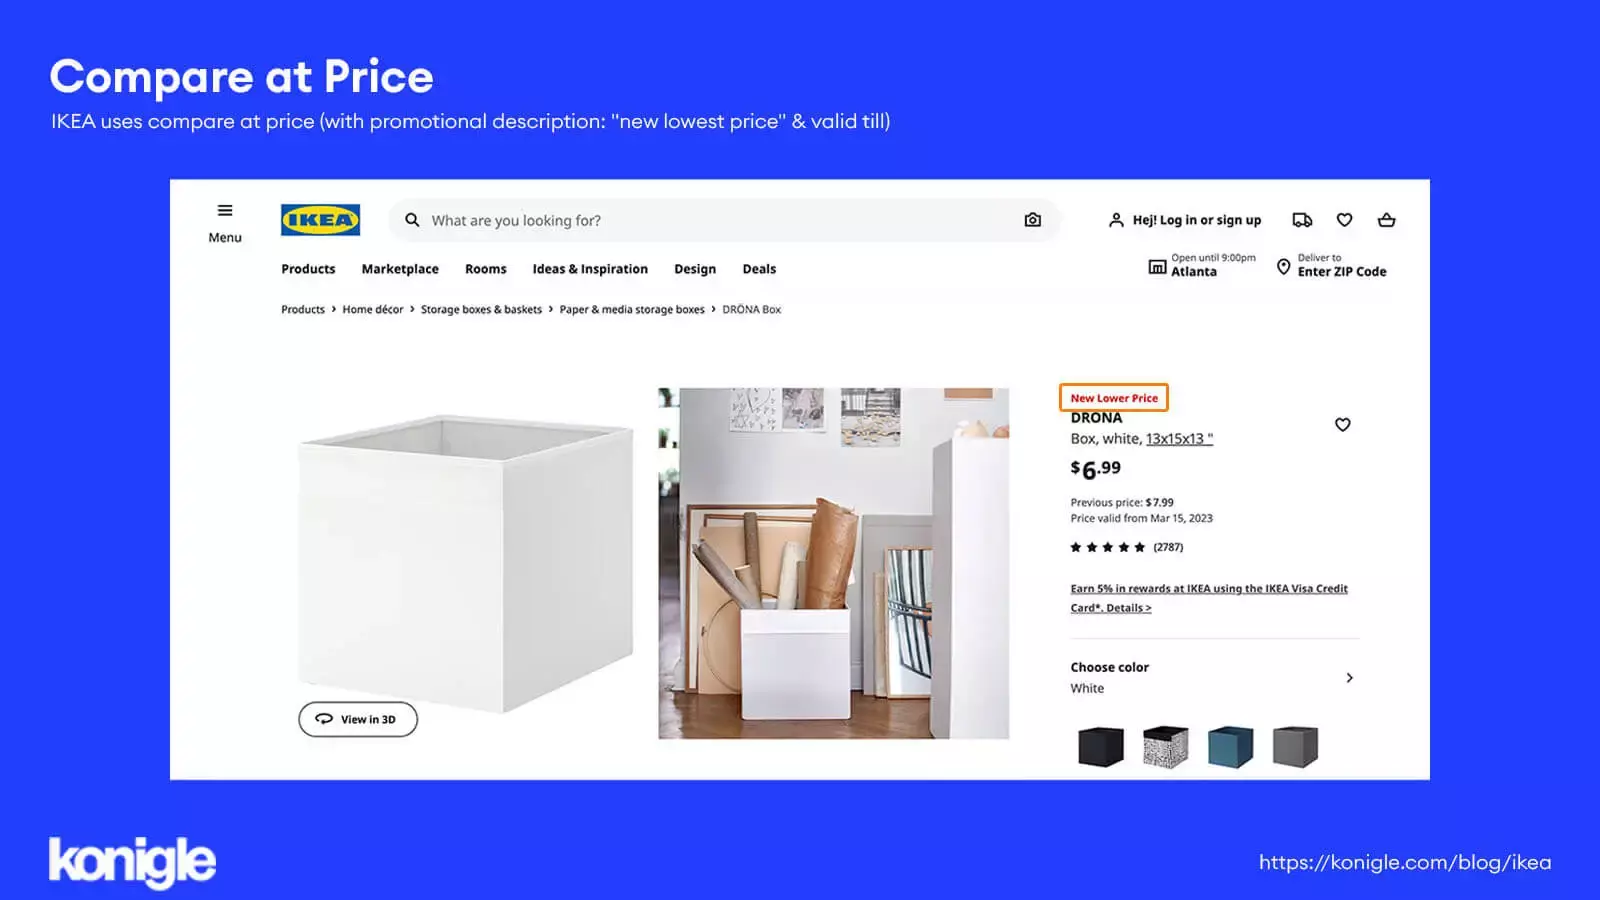 Compare prices of products on Ikea's website.